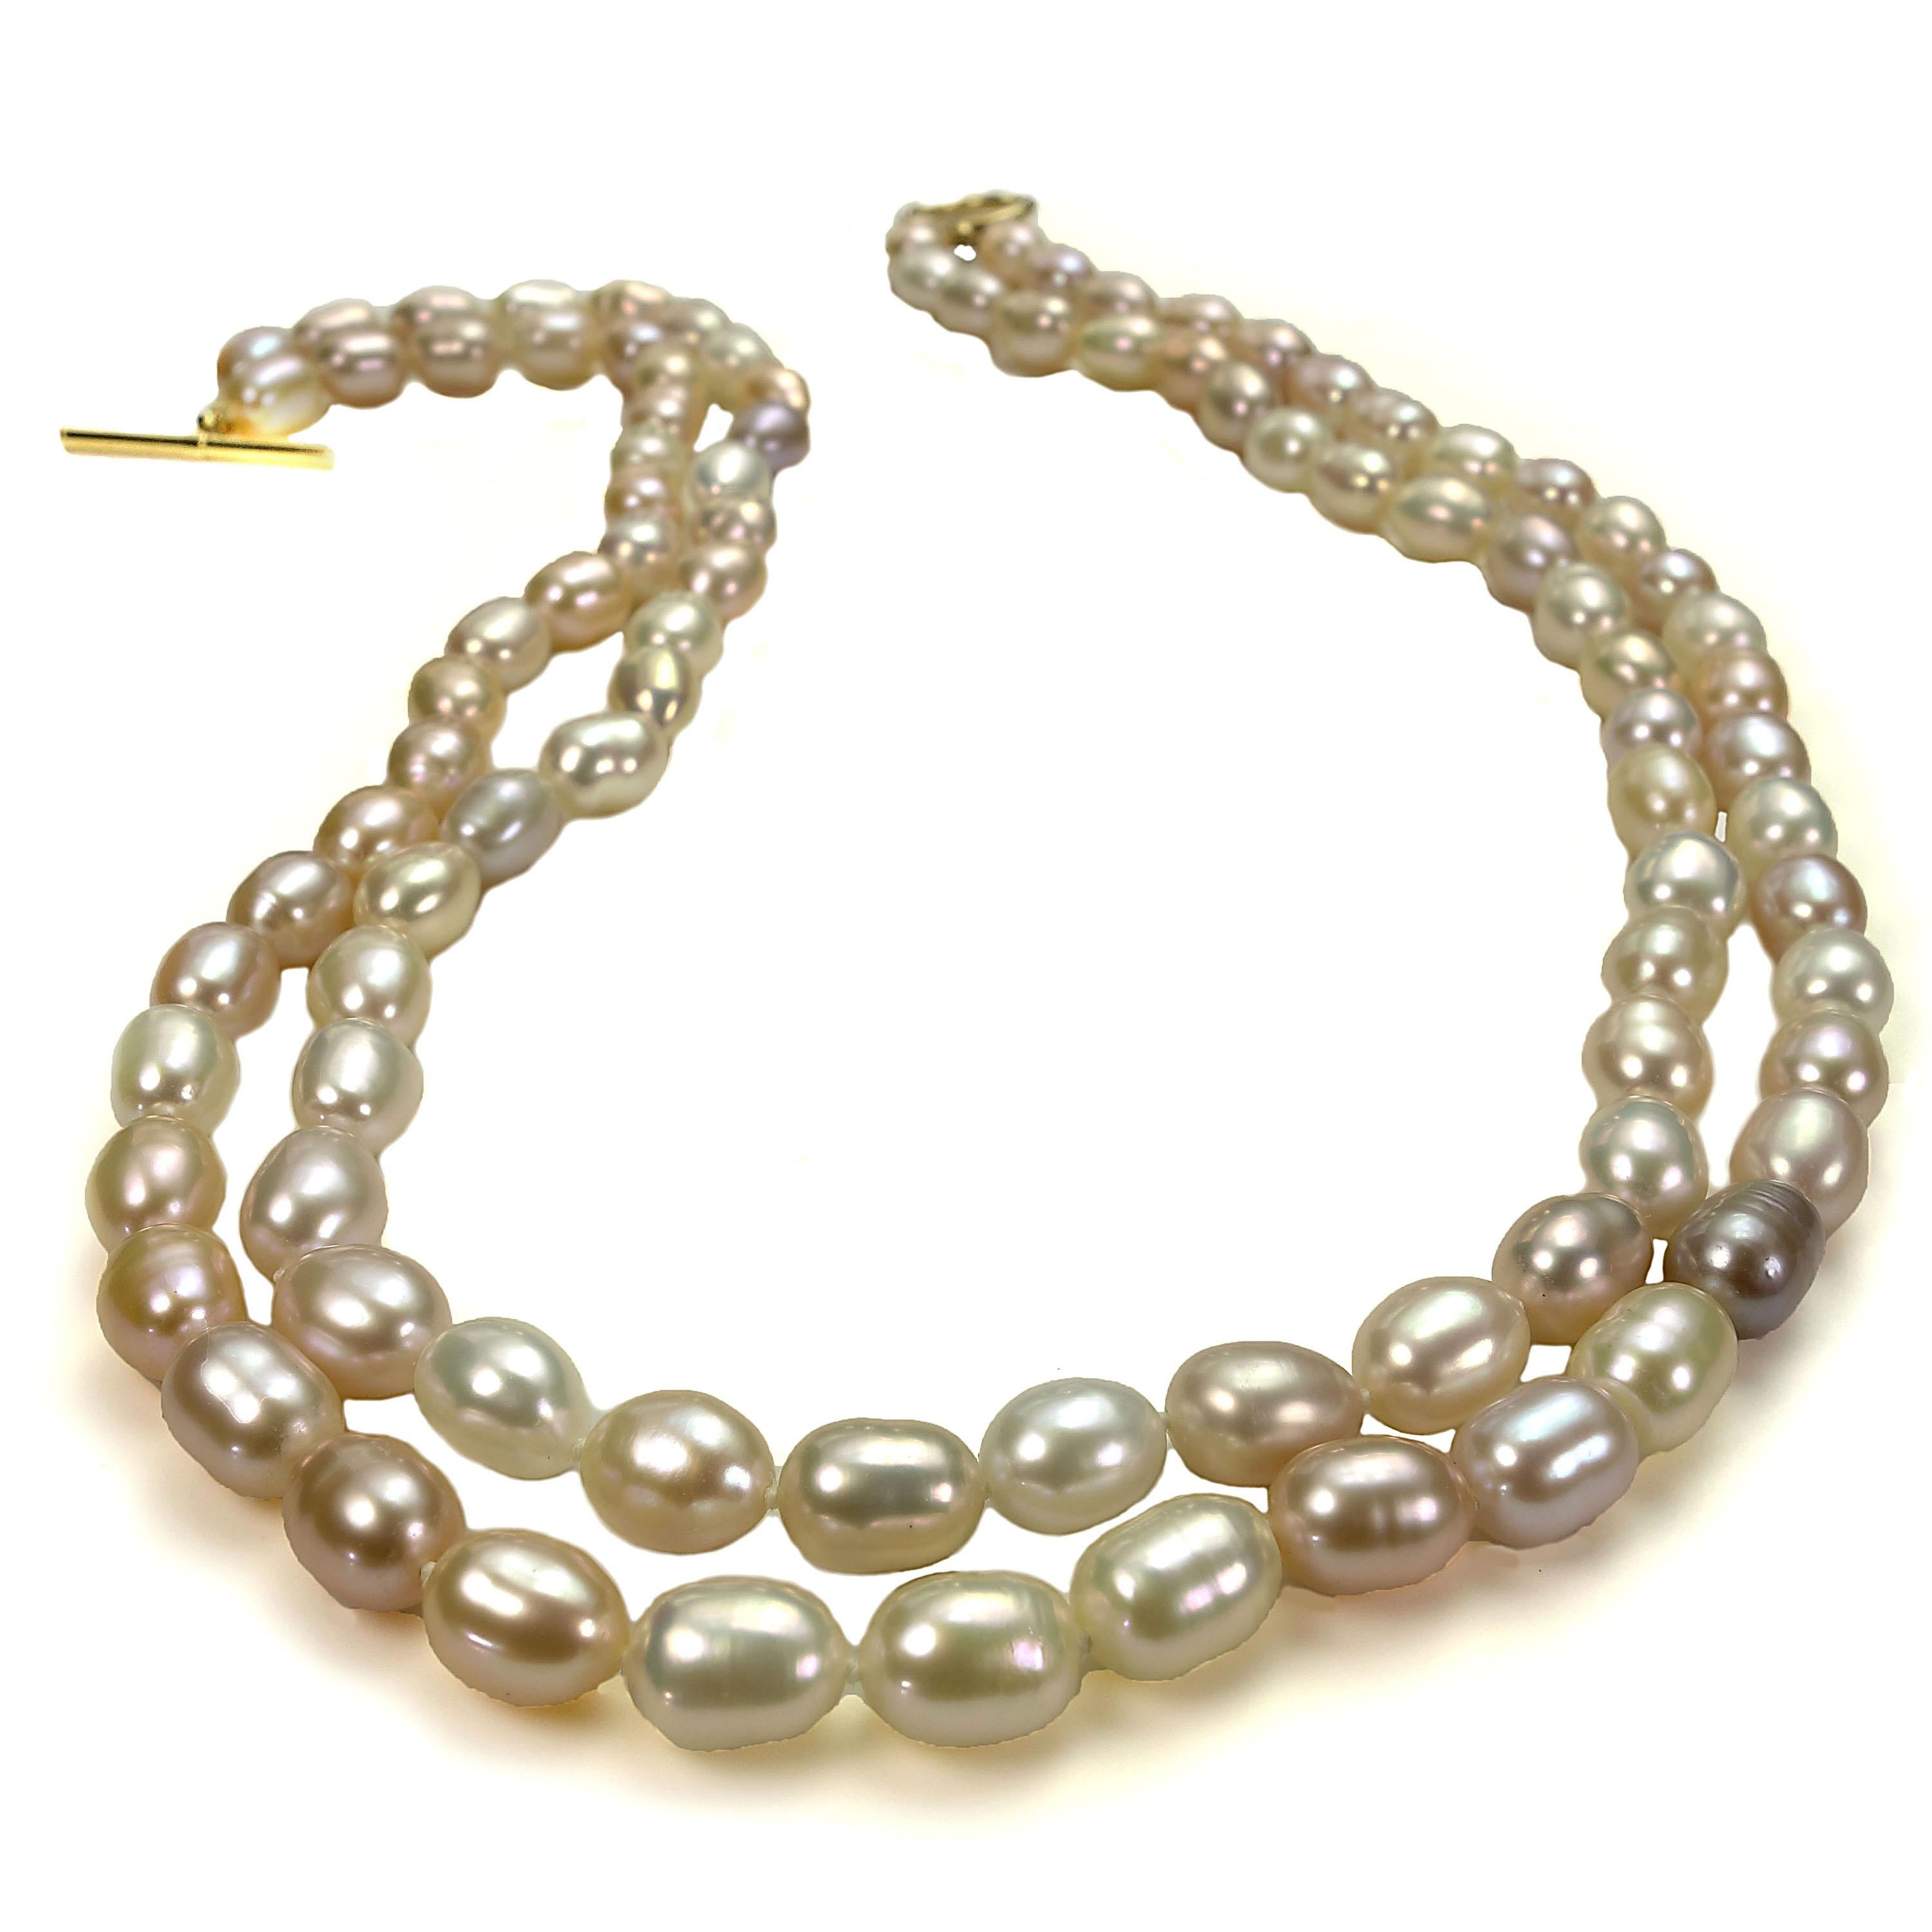 Delicate peach color Oval shape Freshwater Pearl Necklace. Peach is the predominant color, additionally there are creamy and mauve shades of pearls. This unique necklace is so classic you can wear it all the time and everywhere. It is one of those